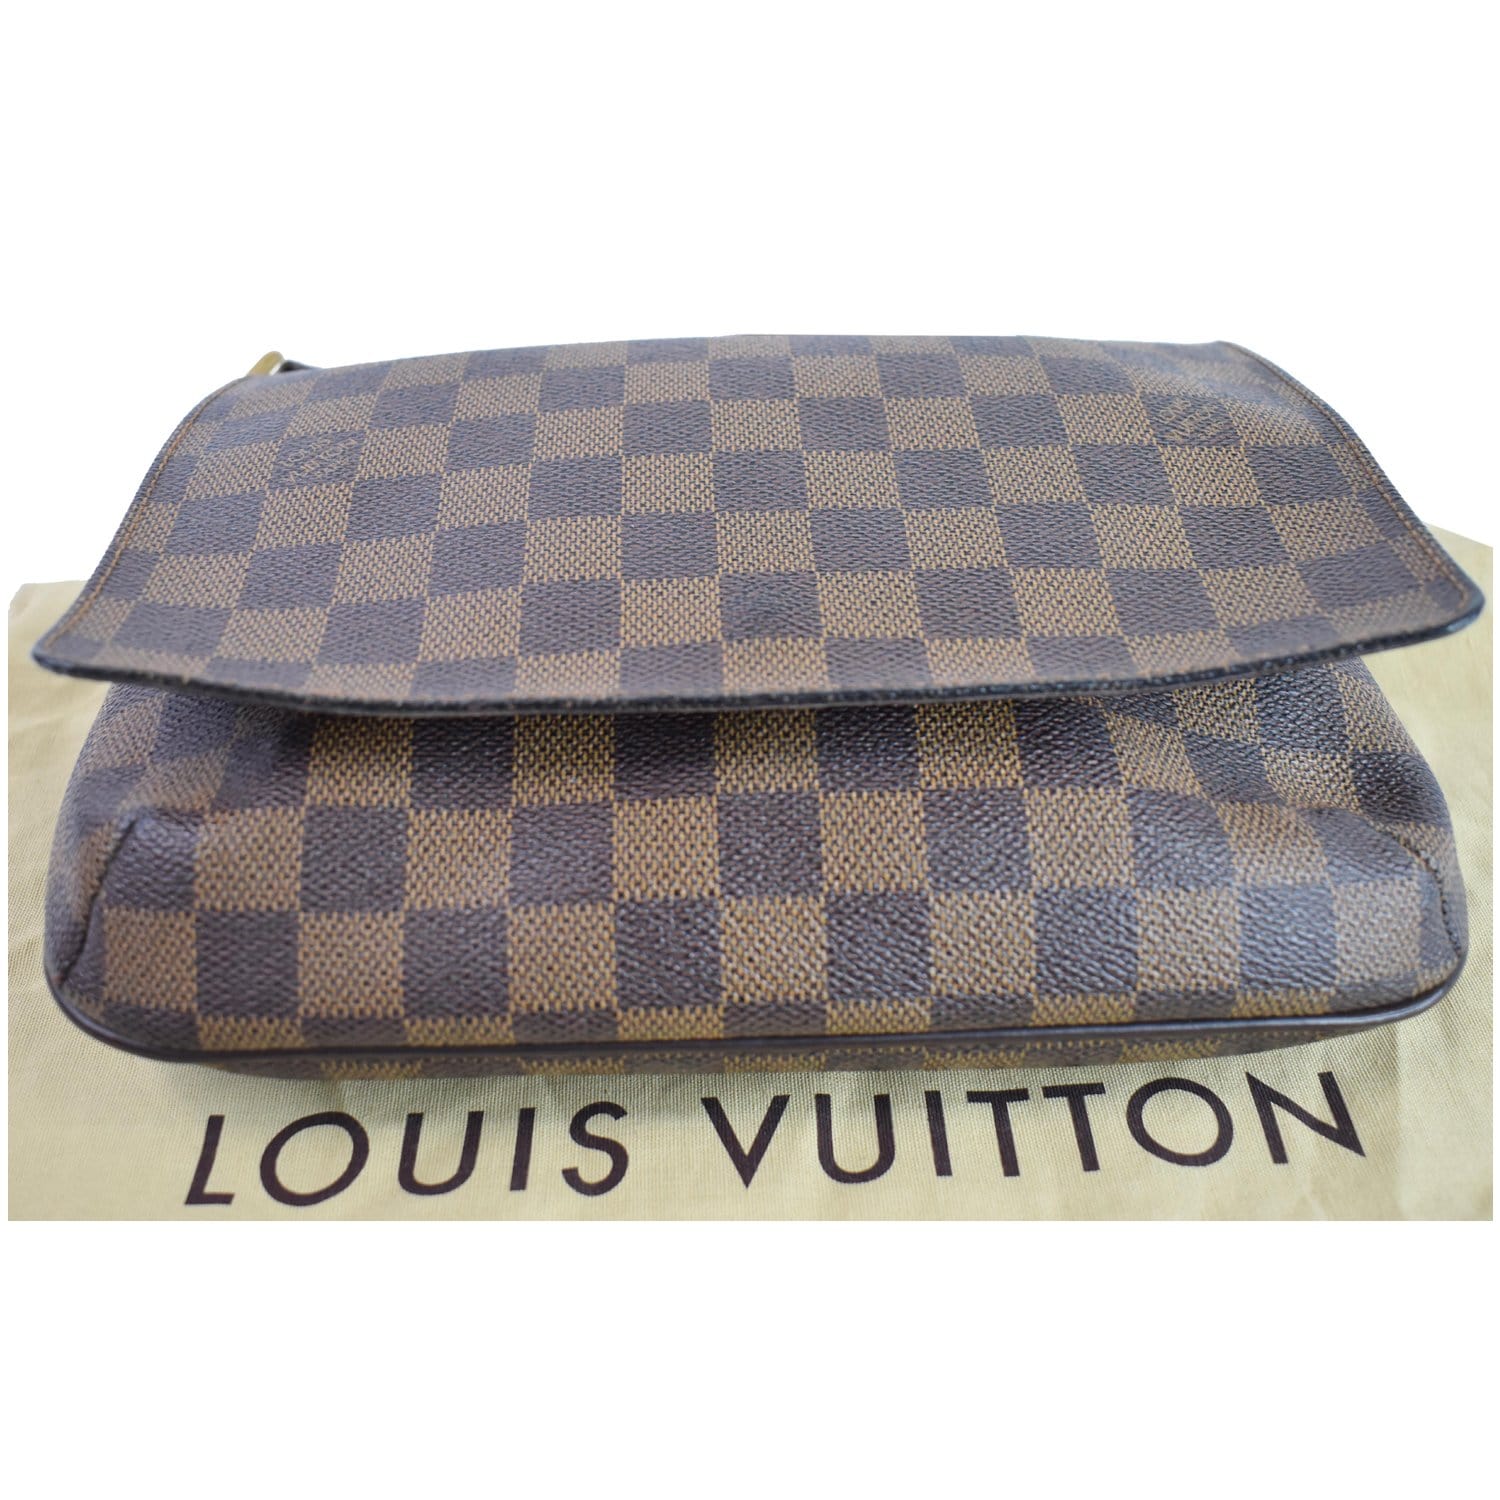 Louis Vuitton - Authenticated Musette Tango Handbag - Polyester Brown for Women, Very Good Condition